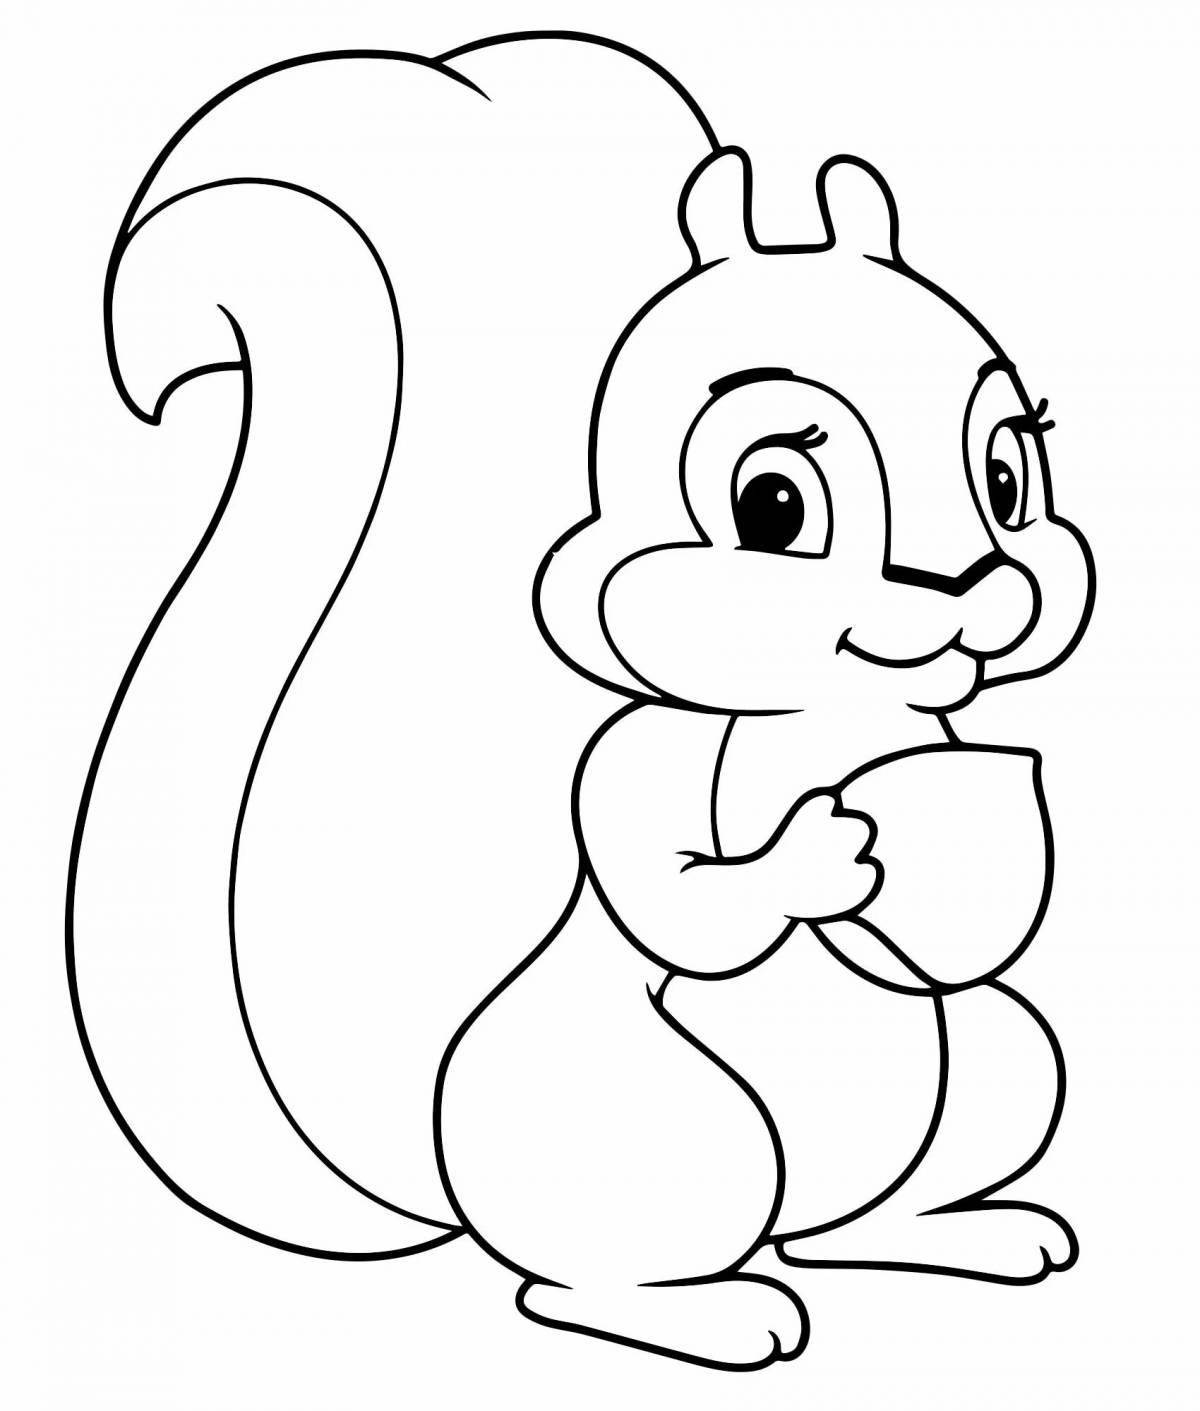 Adorable squirrel coloring book for 2-3 year olds